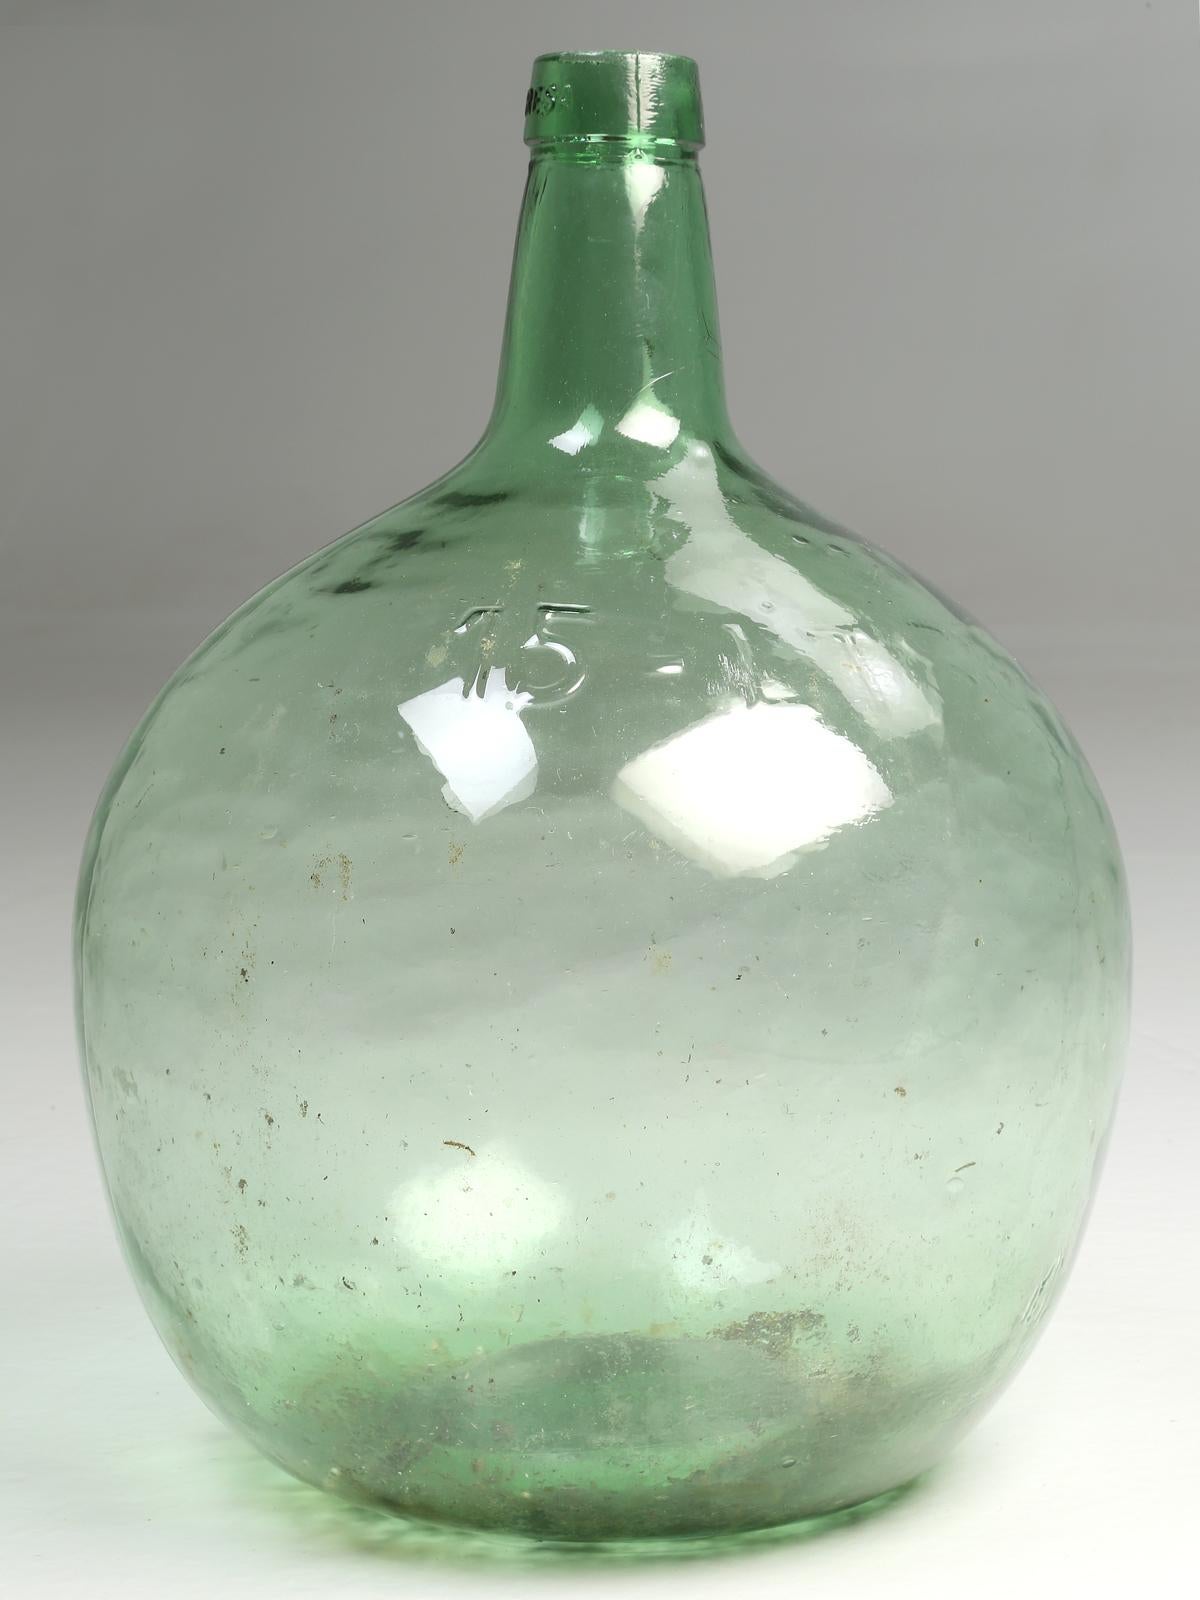 The Demijohn or Carboy, also spelled Carbouy originally referred to a large glass vessel with a small neck, encased in wicker. The word Demijohn comes from the French dame-jeanne, (Lady Jane), first used in France during the 17th century. Others